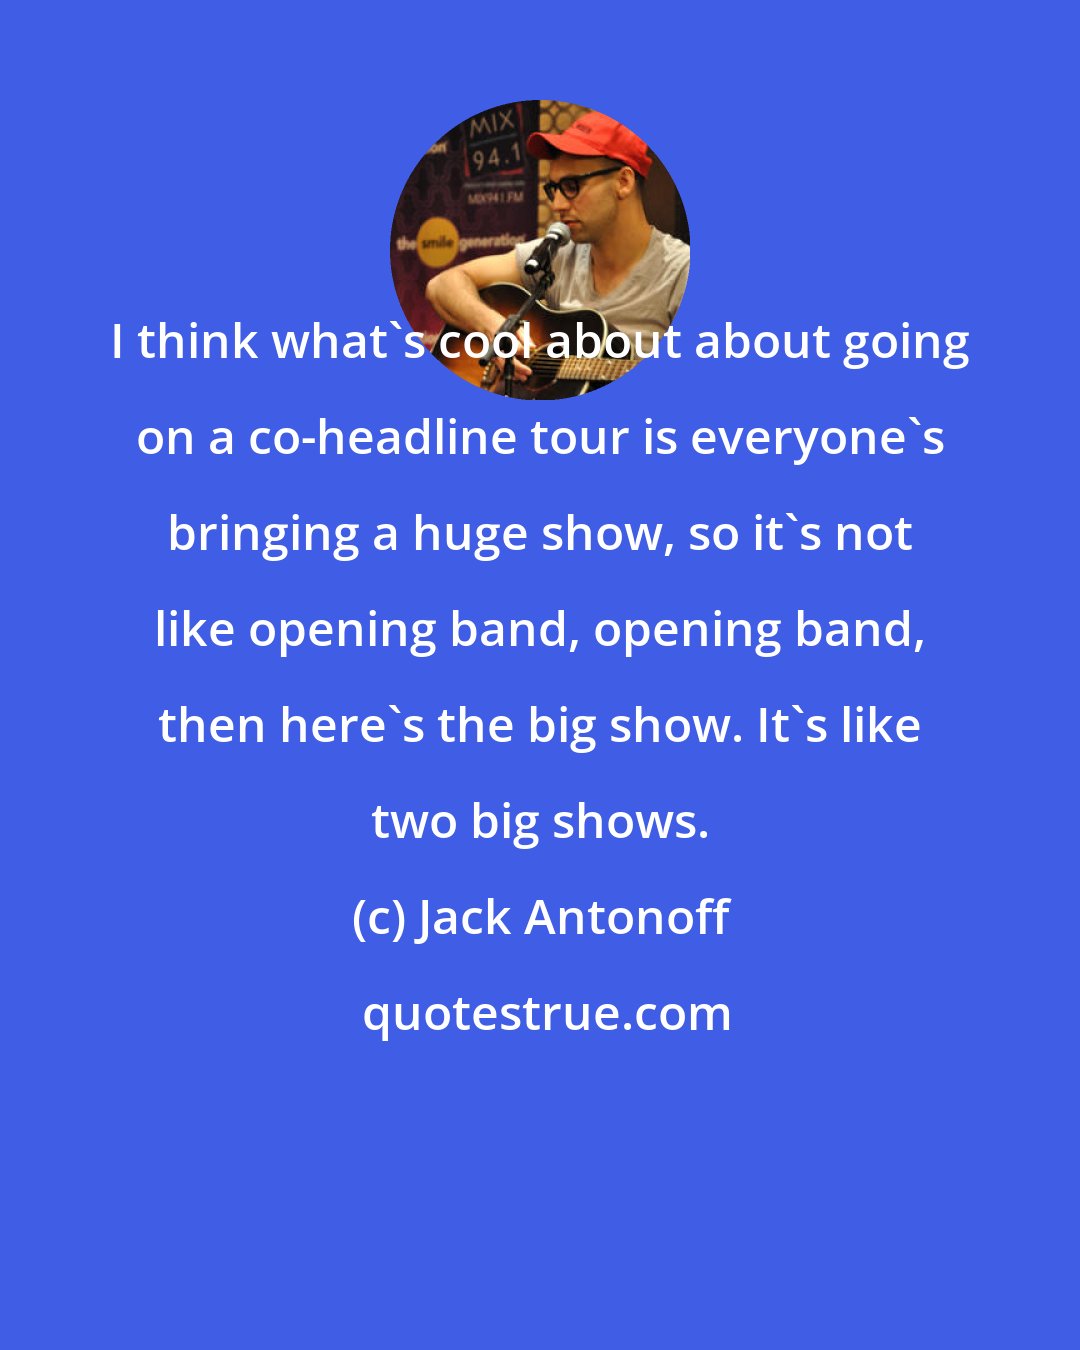 Jack Antonoff: I think what's cool about about going on a co-headline tour is everyone's bringing a huge show, so it's not like opening band, opening band, then here's the big show. It's like two big shows.